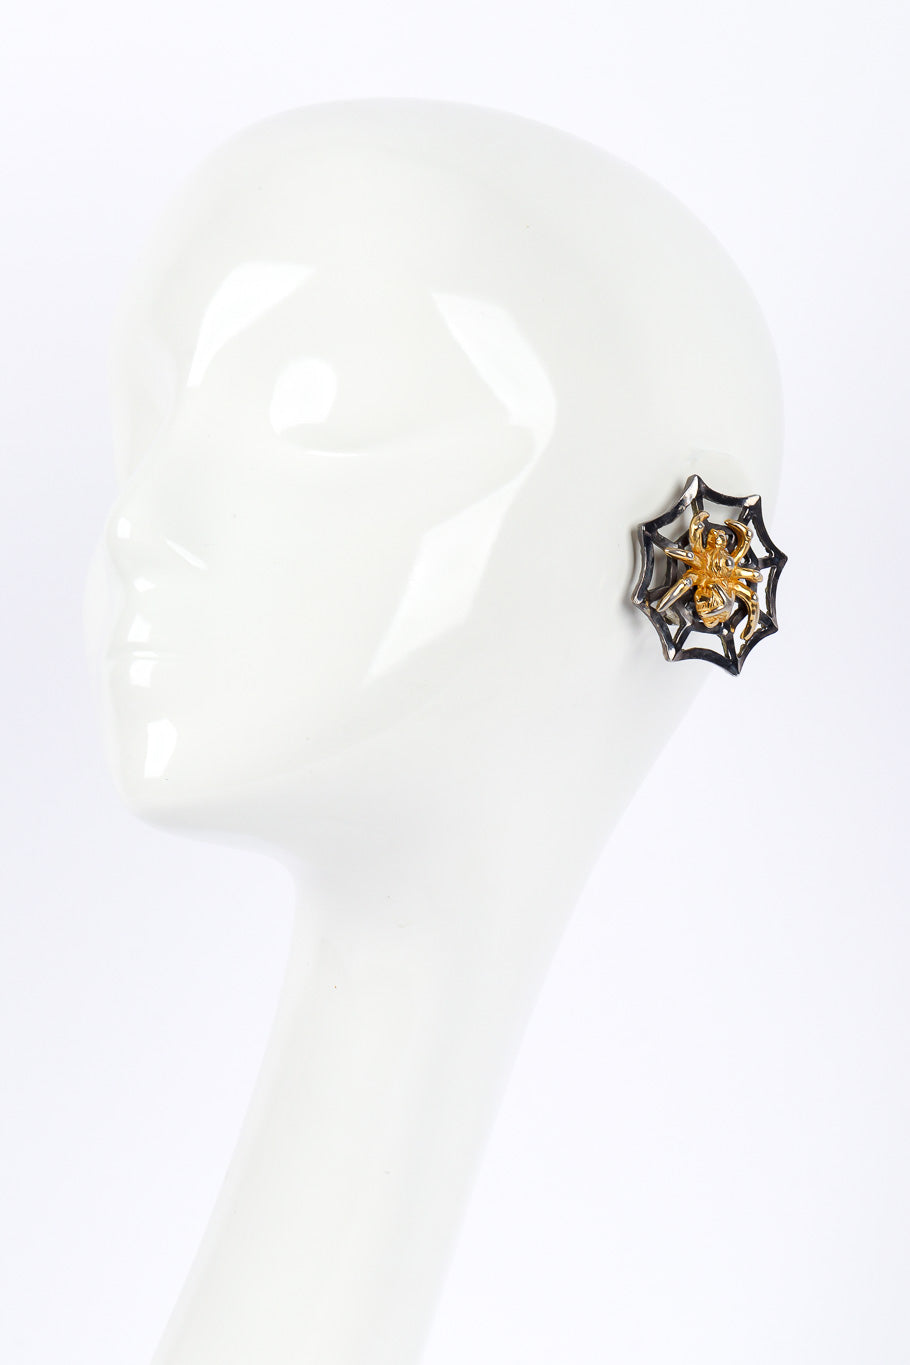 Spider earrings by Lorenz Paris on white background on mannequin @recessla